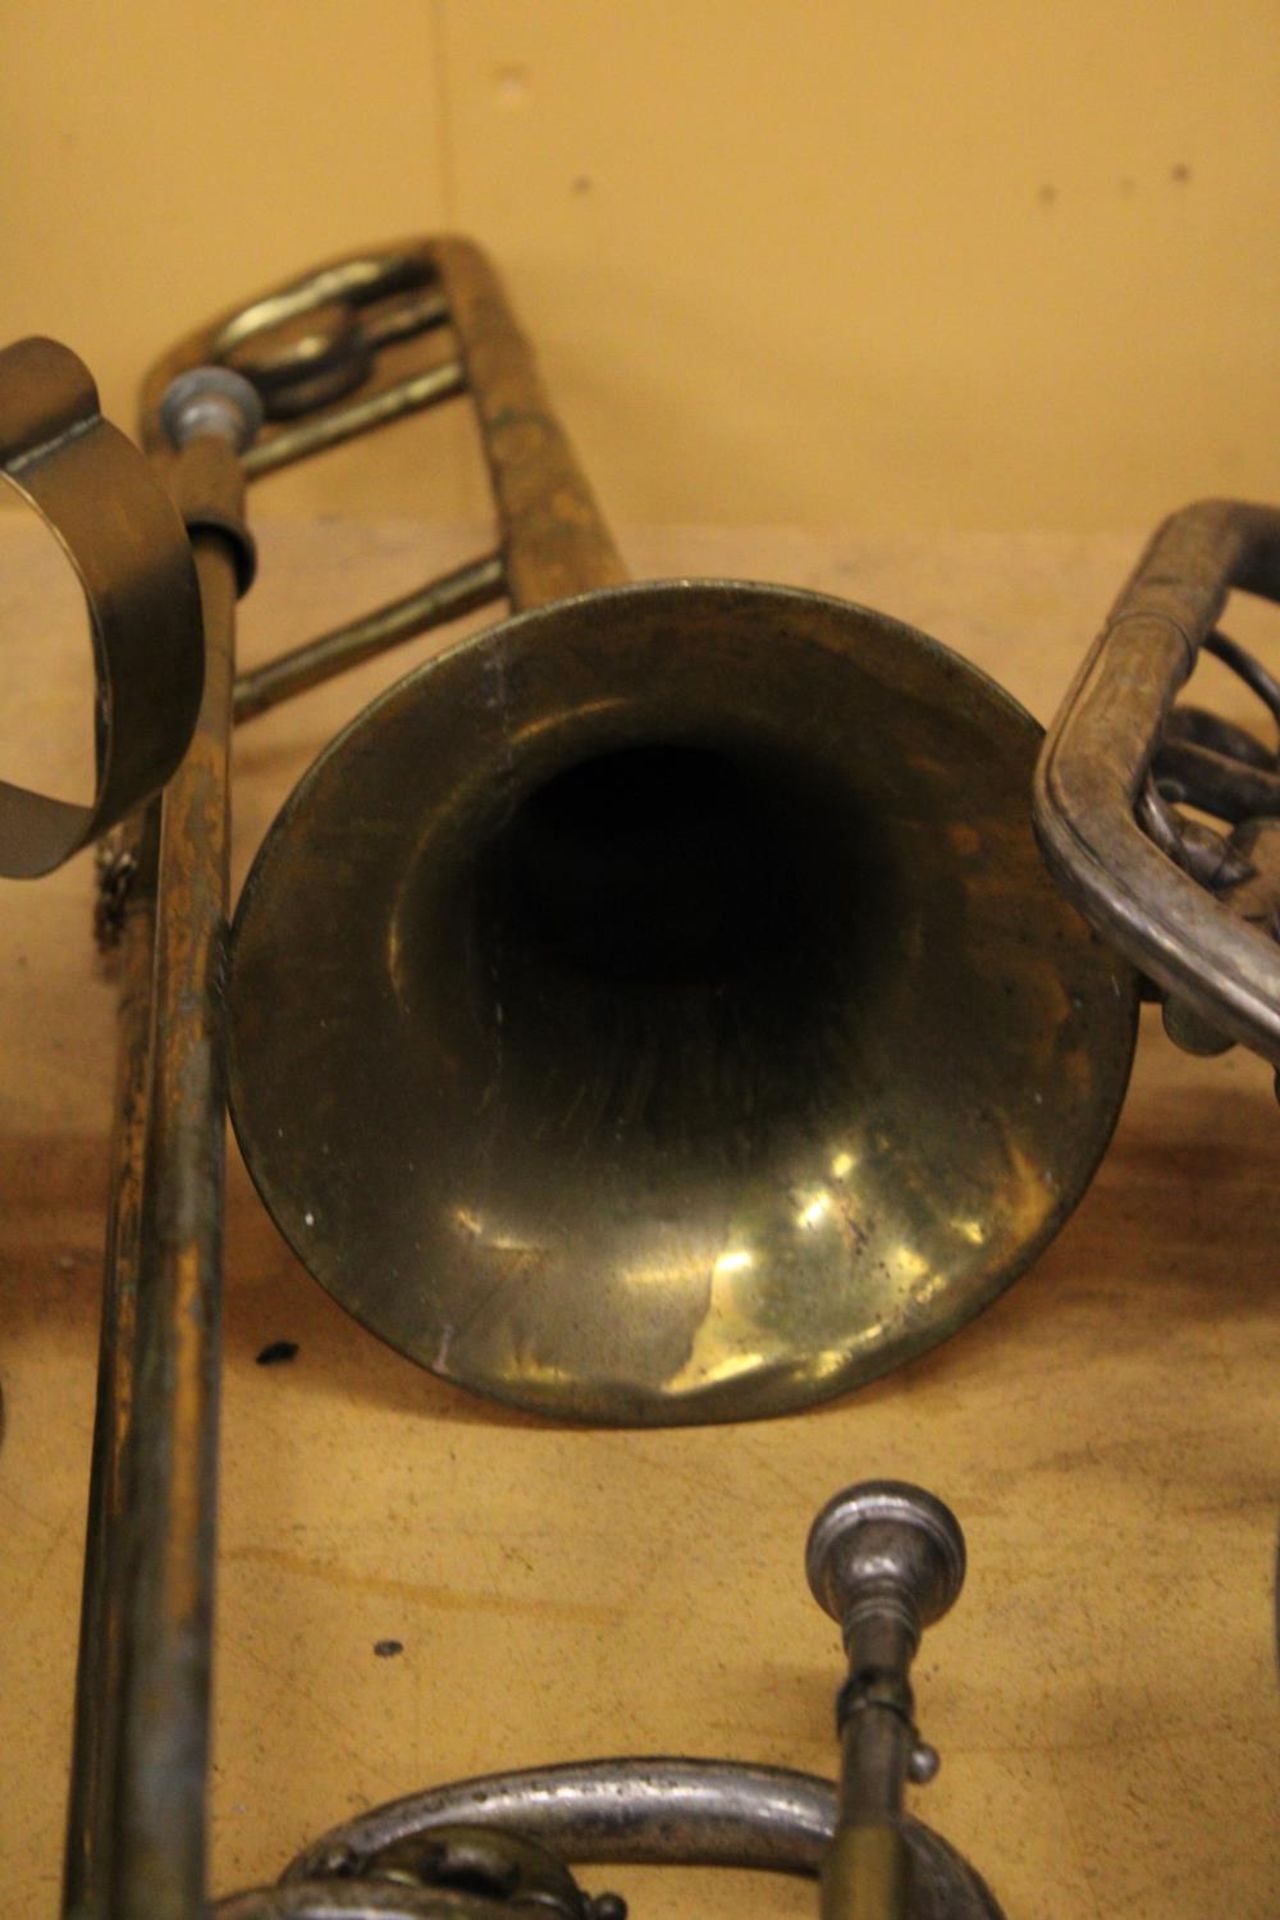 THREE VINTAGE MUSICAL INSTRUMENTS TO INCLUDE A CORNET, BARITONE TENOR HORN AND TROMBONE - Image 3 of 6